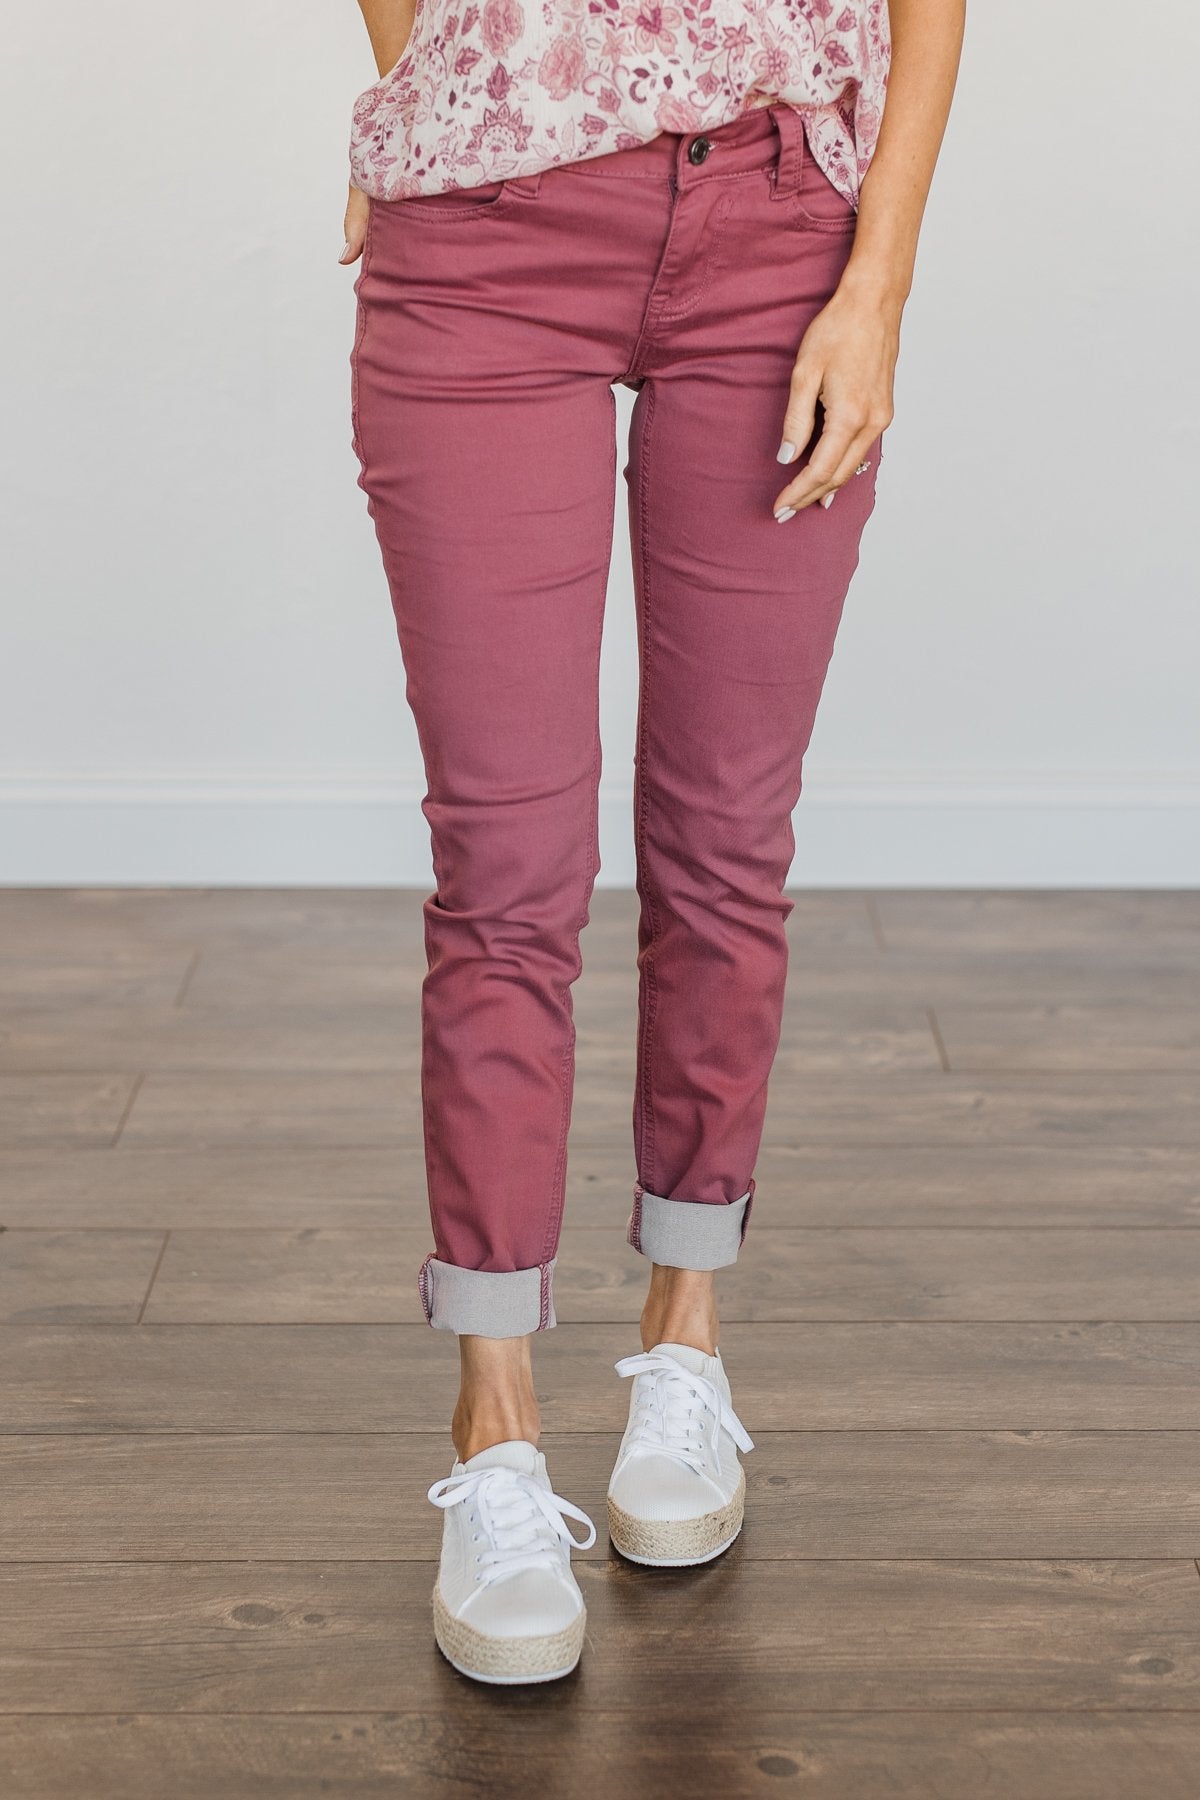 Rubberband Stretch Skinny Jeans- Rosemary Wash – The Pulse Boutique